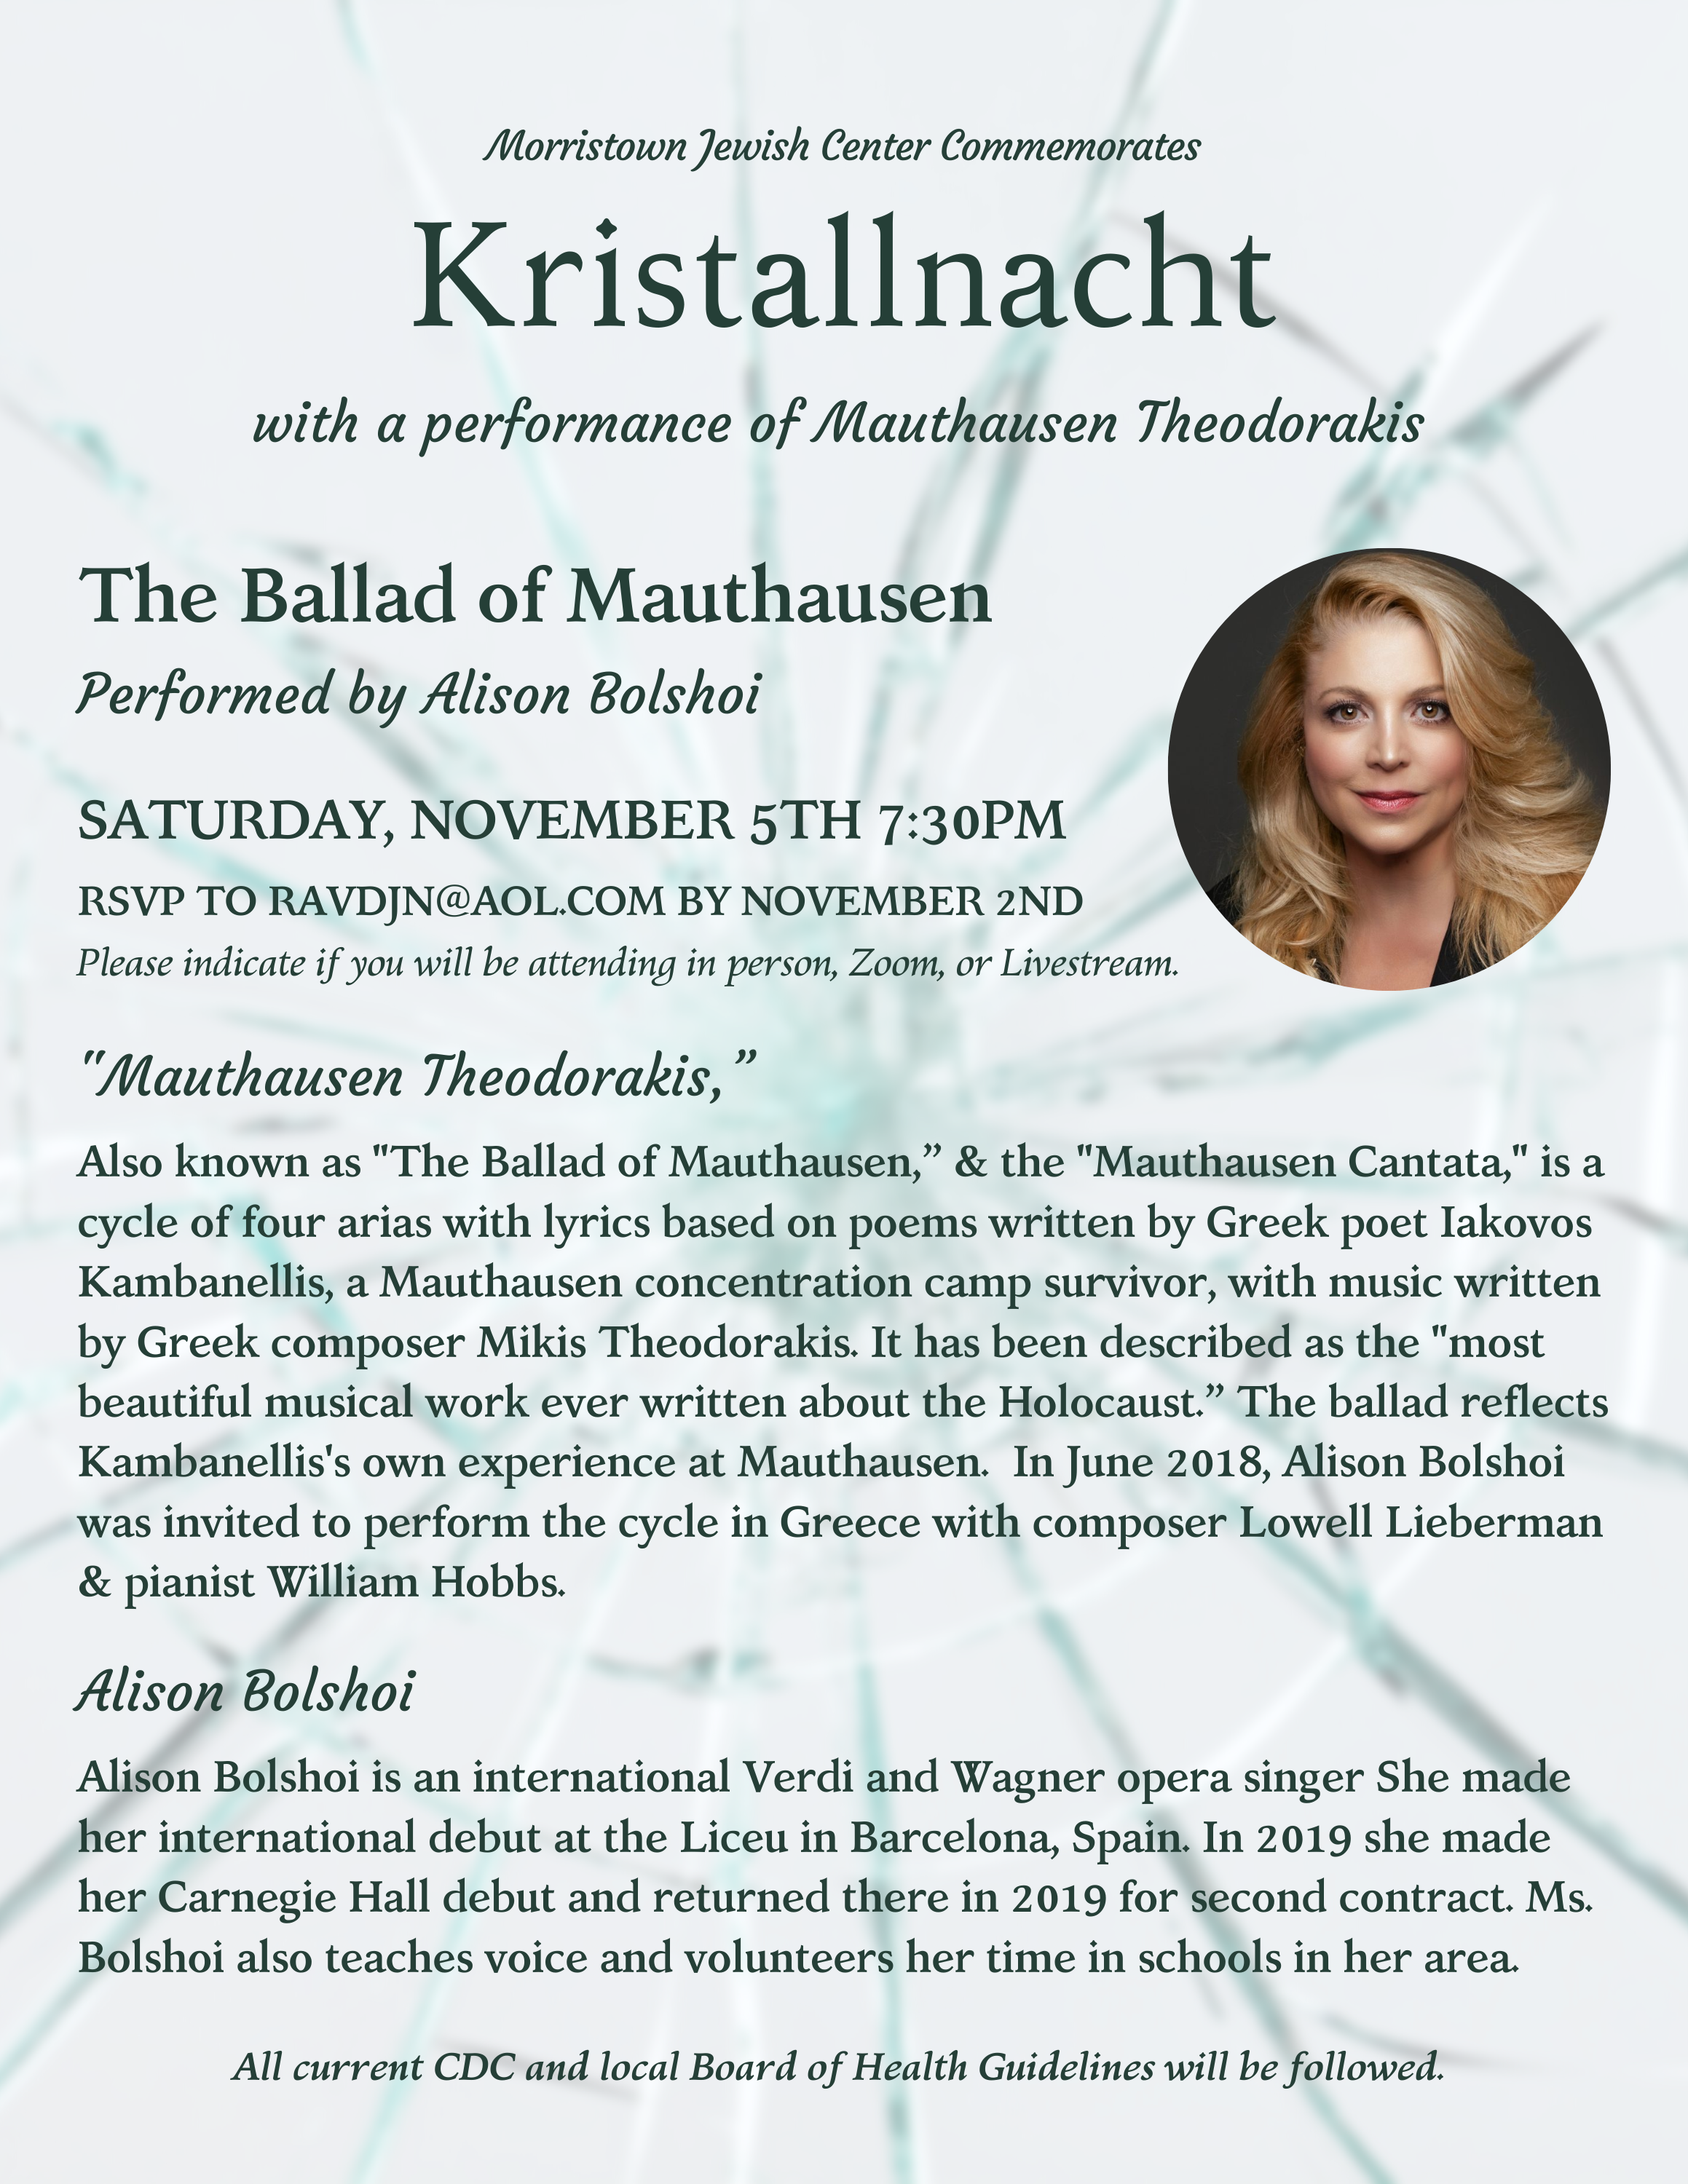 Commemorate Kristallnacht - The Ballad of Mauthausen Performed by Allison Bolshoi